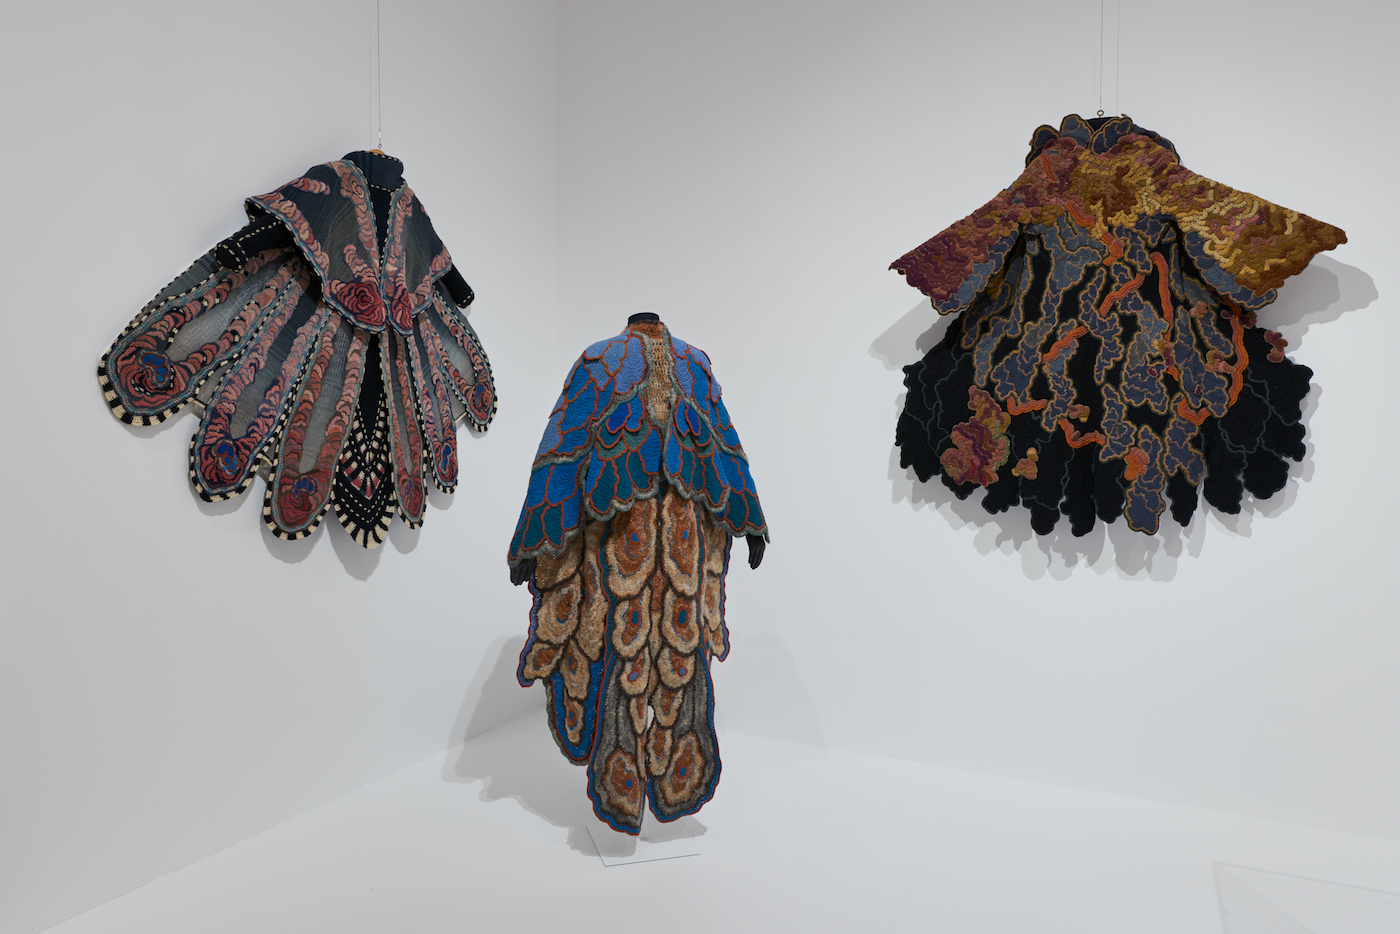 Installation view of Off the Wall: American Art to Wear at the Philadelphia Museum of Art, with work by Sharron Hedges (courtesy Philadelphia Museum of Art)